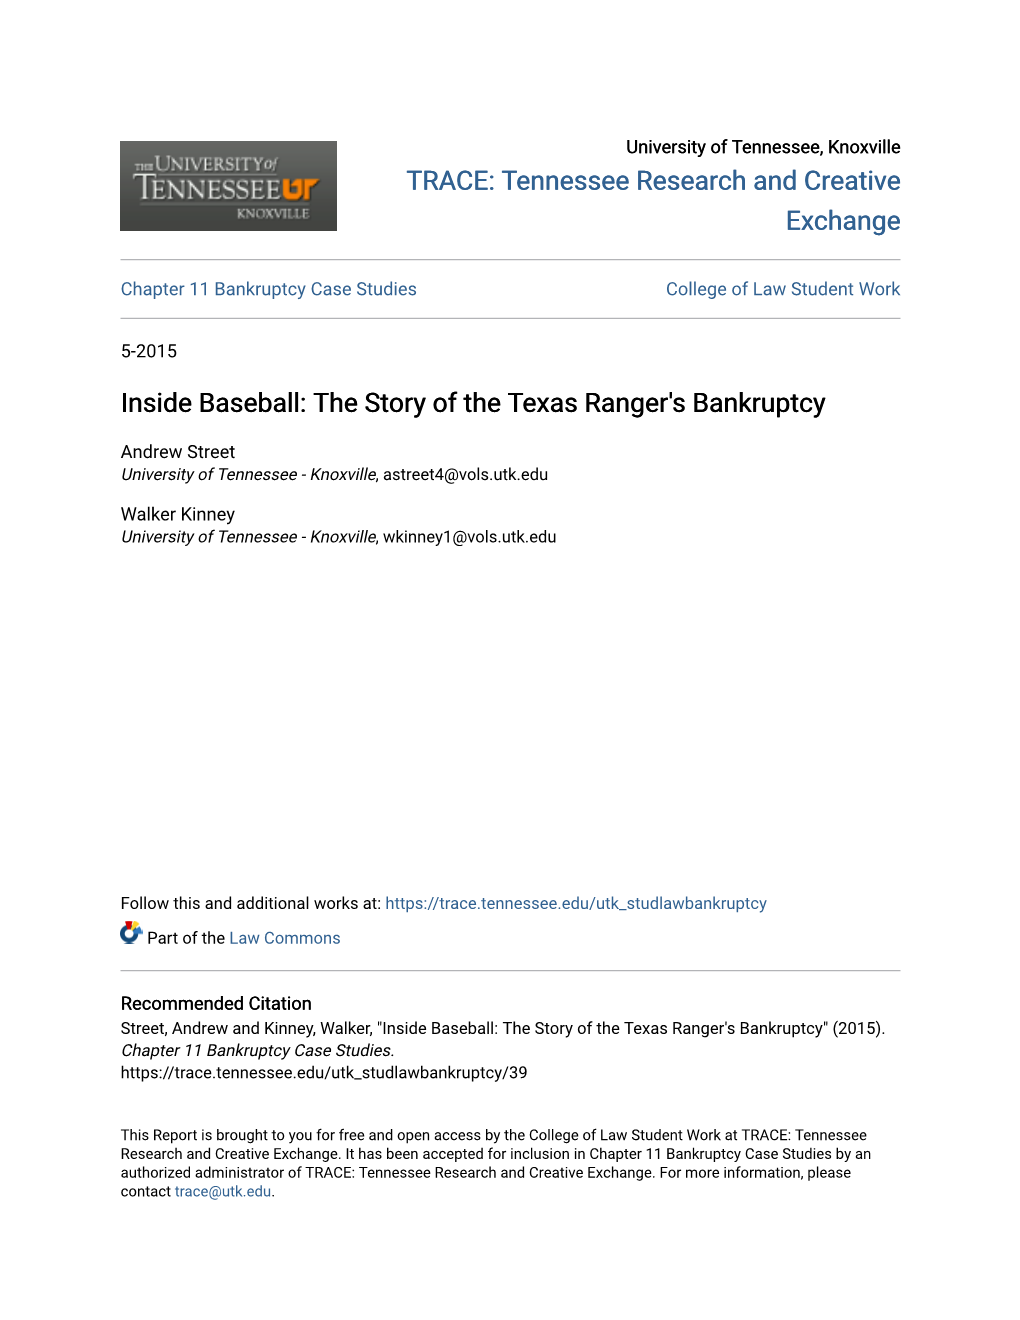 The Story of the Texas Ranger's Bankruptcy